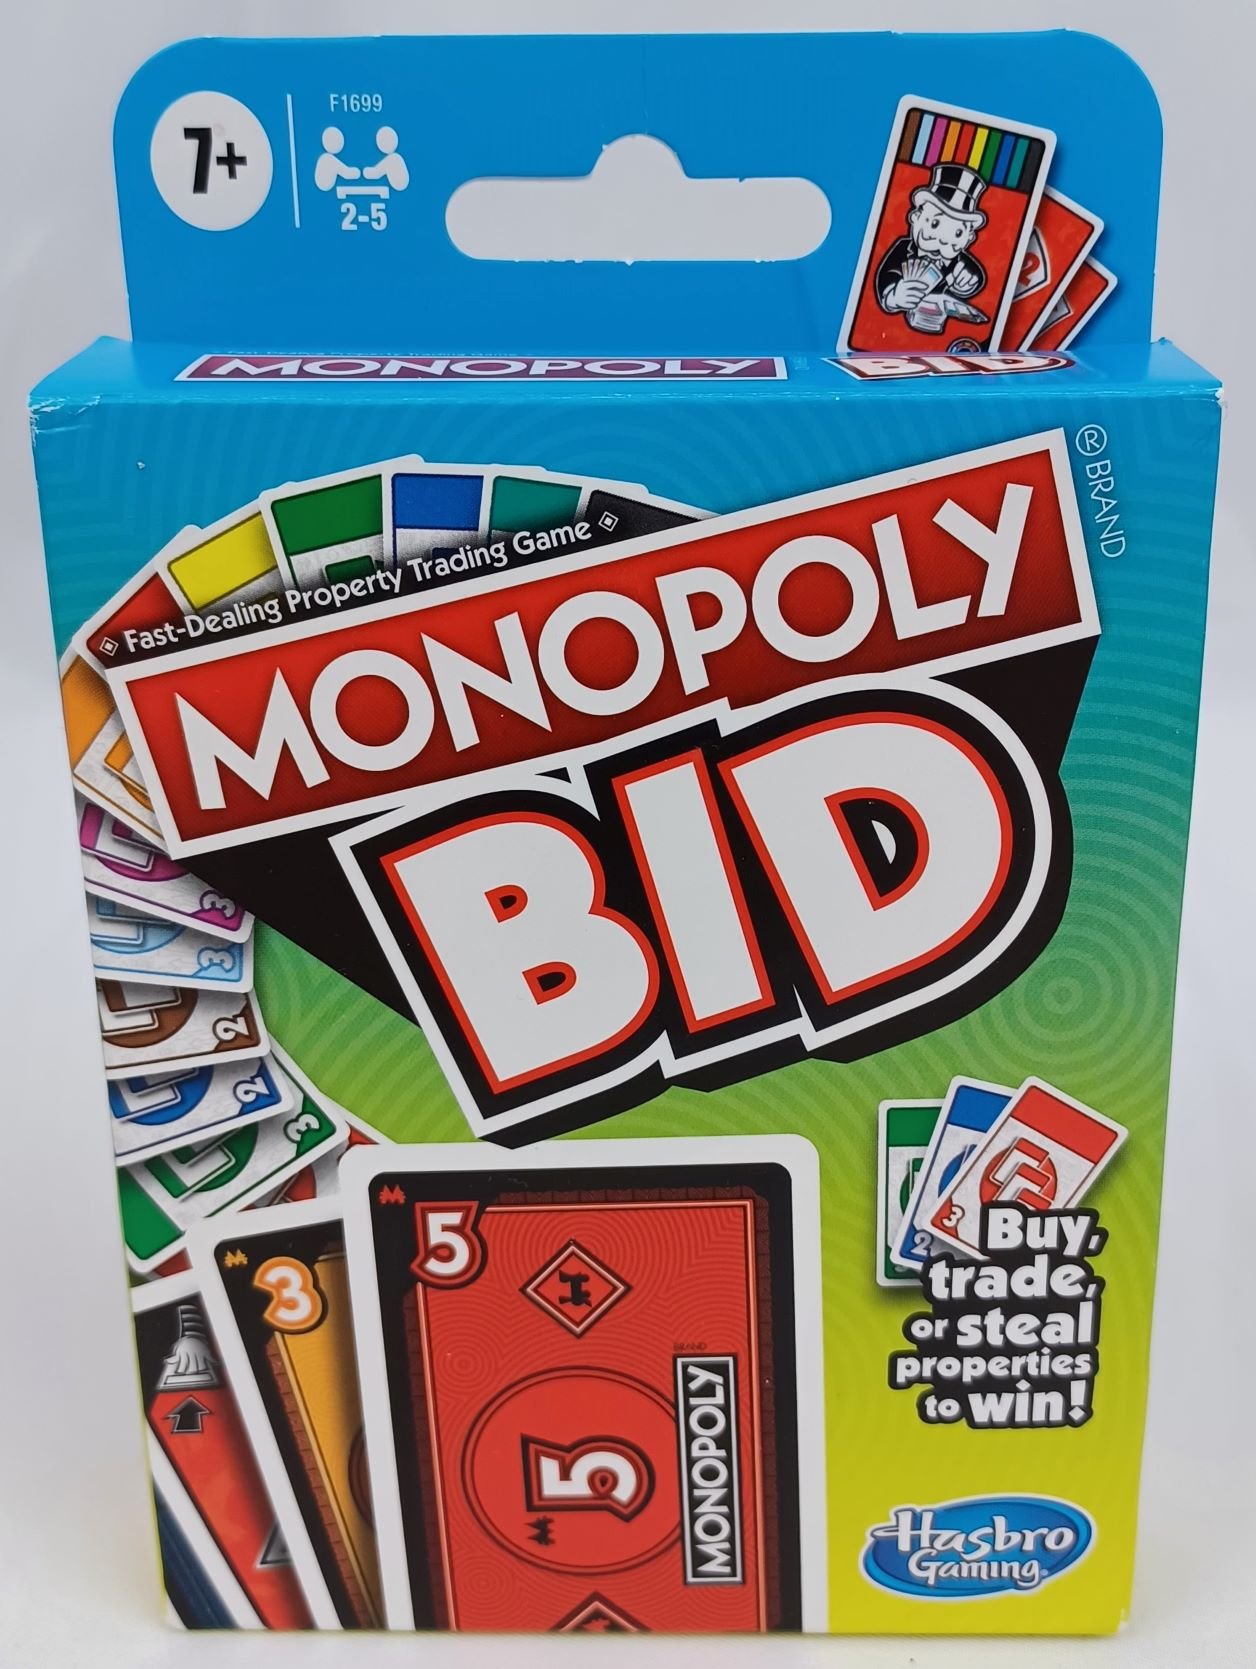 Monopoly Bid Card Game Review and Rules